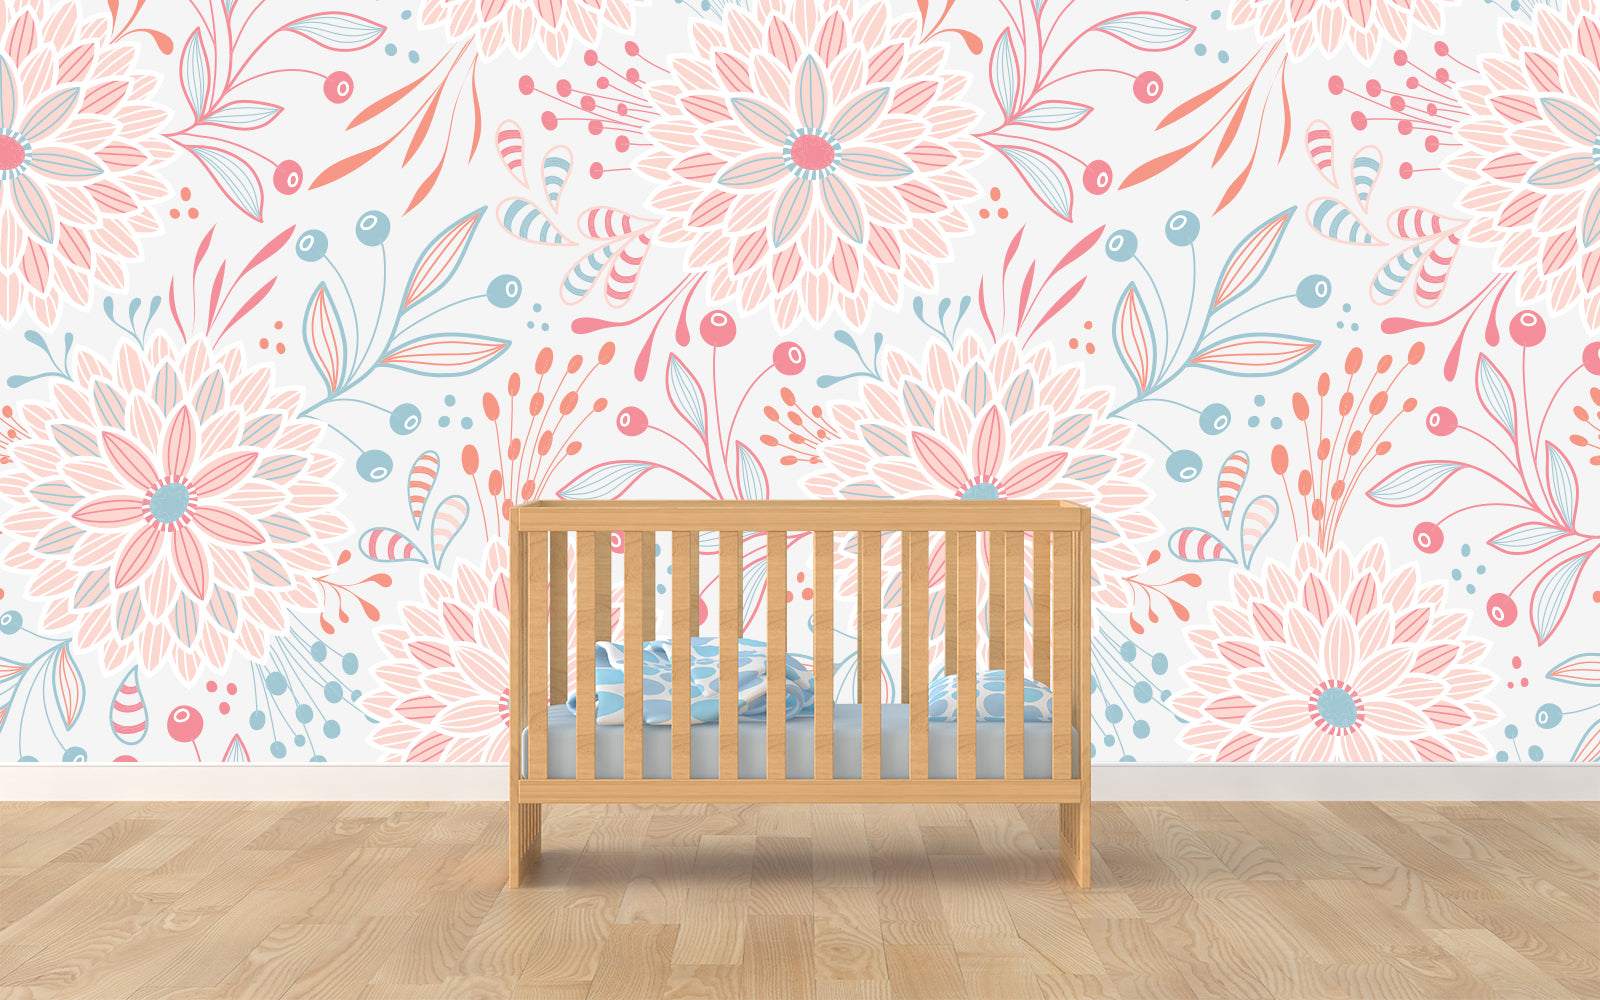 Melt away as the warm and cool pastels dance and play in this carefree floral pattern for young and old alike.